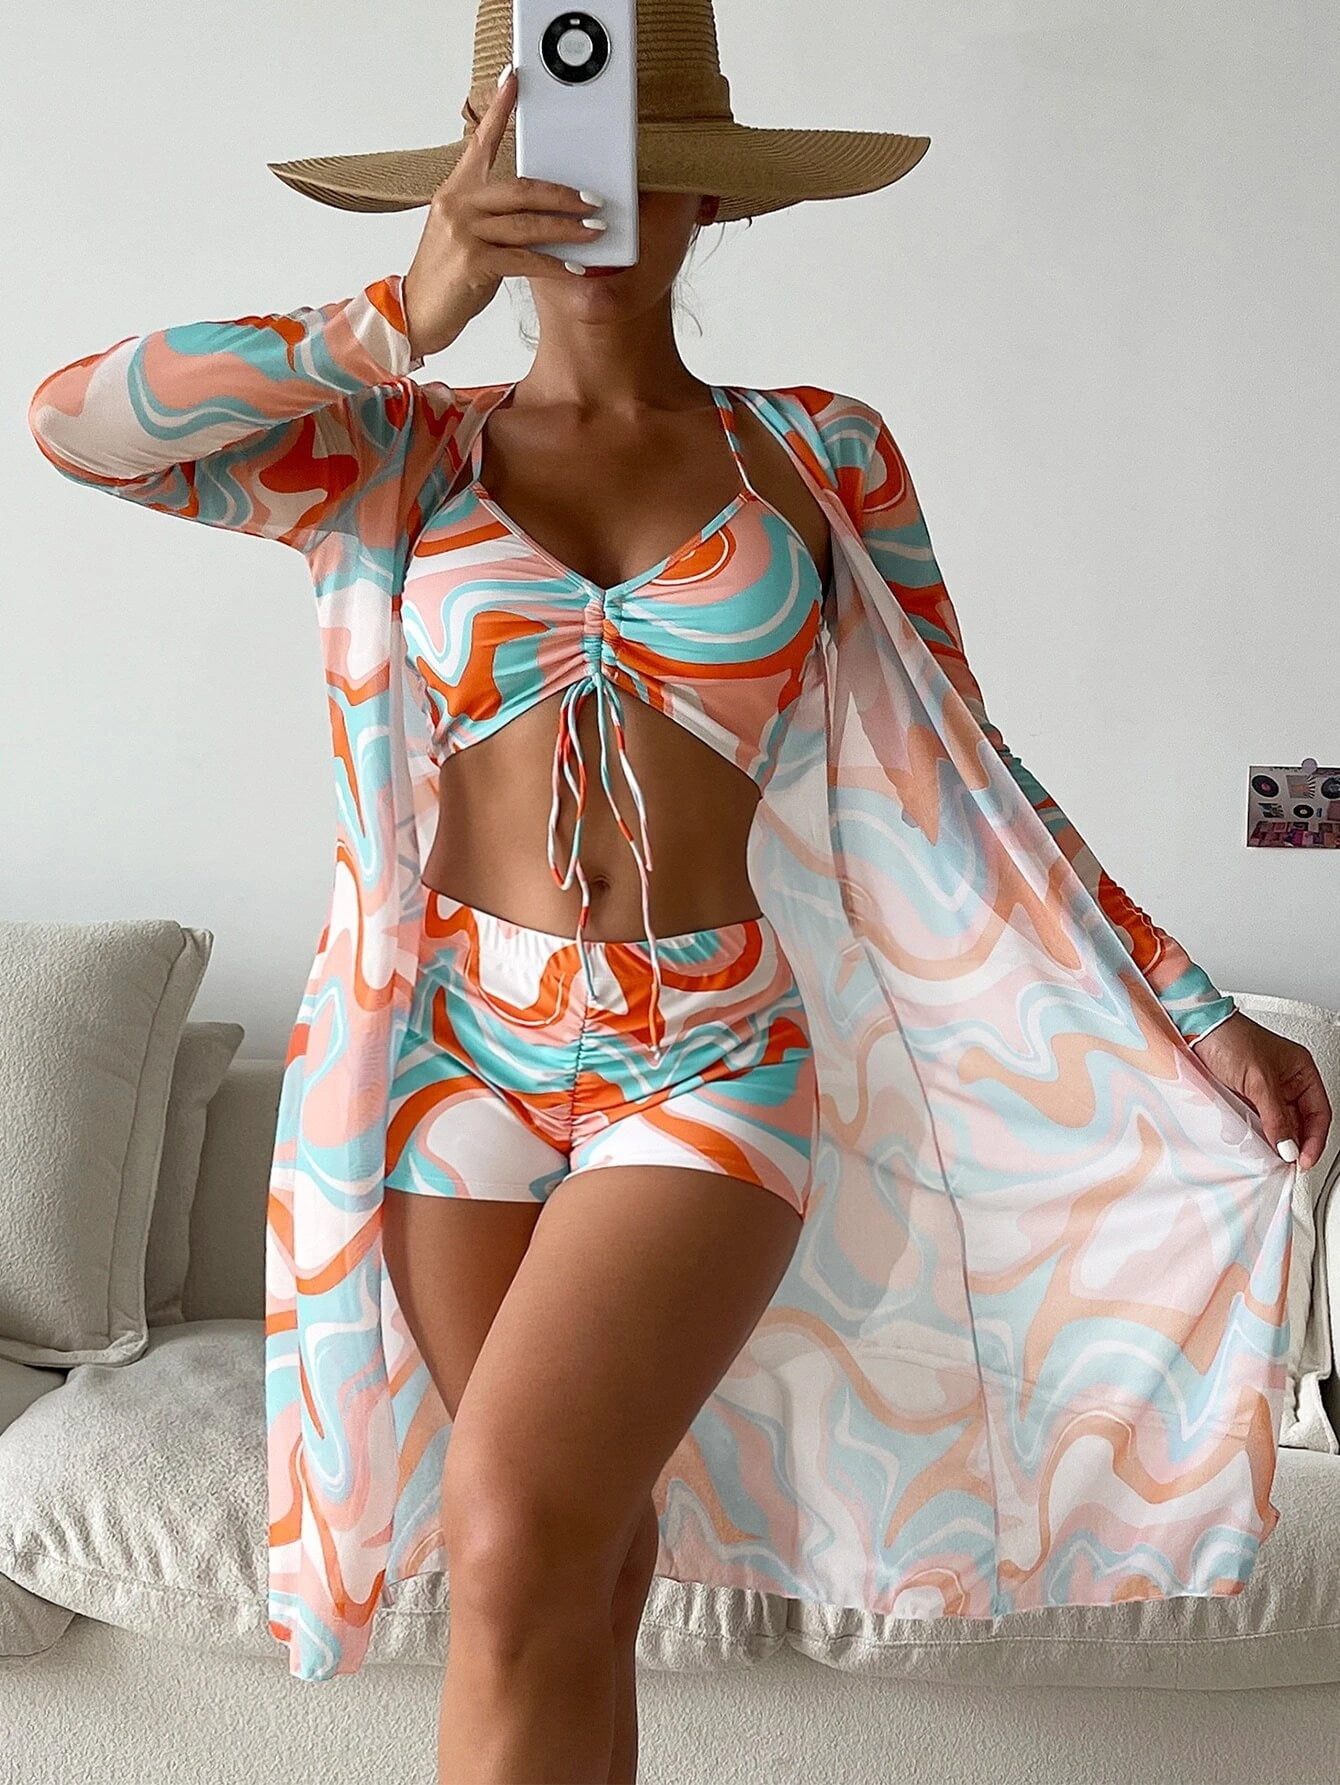 Women's Swimsuits & Cover-Ups